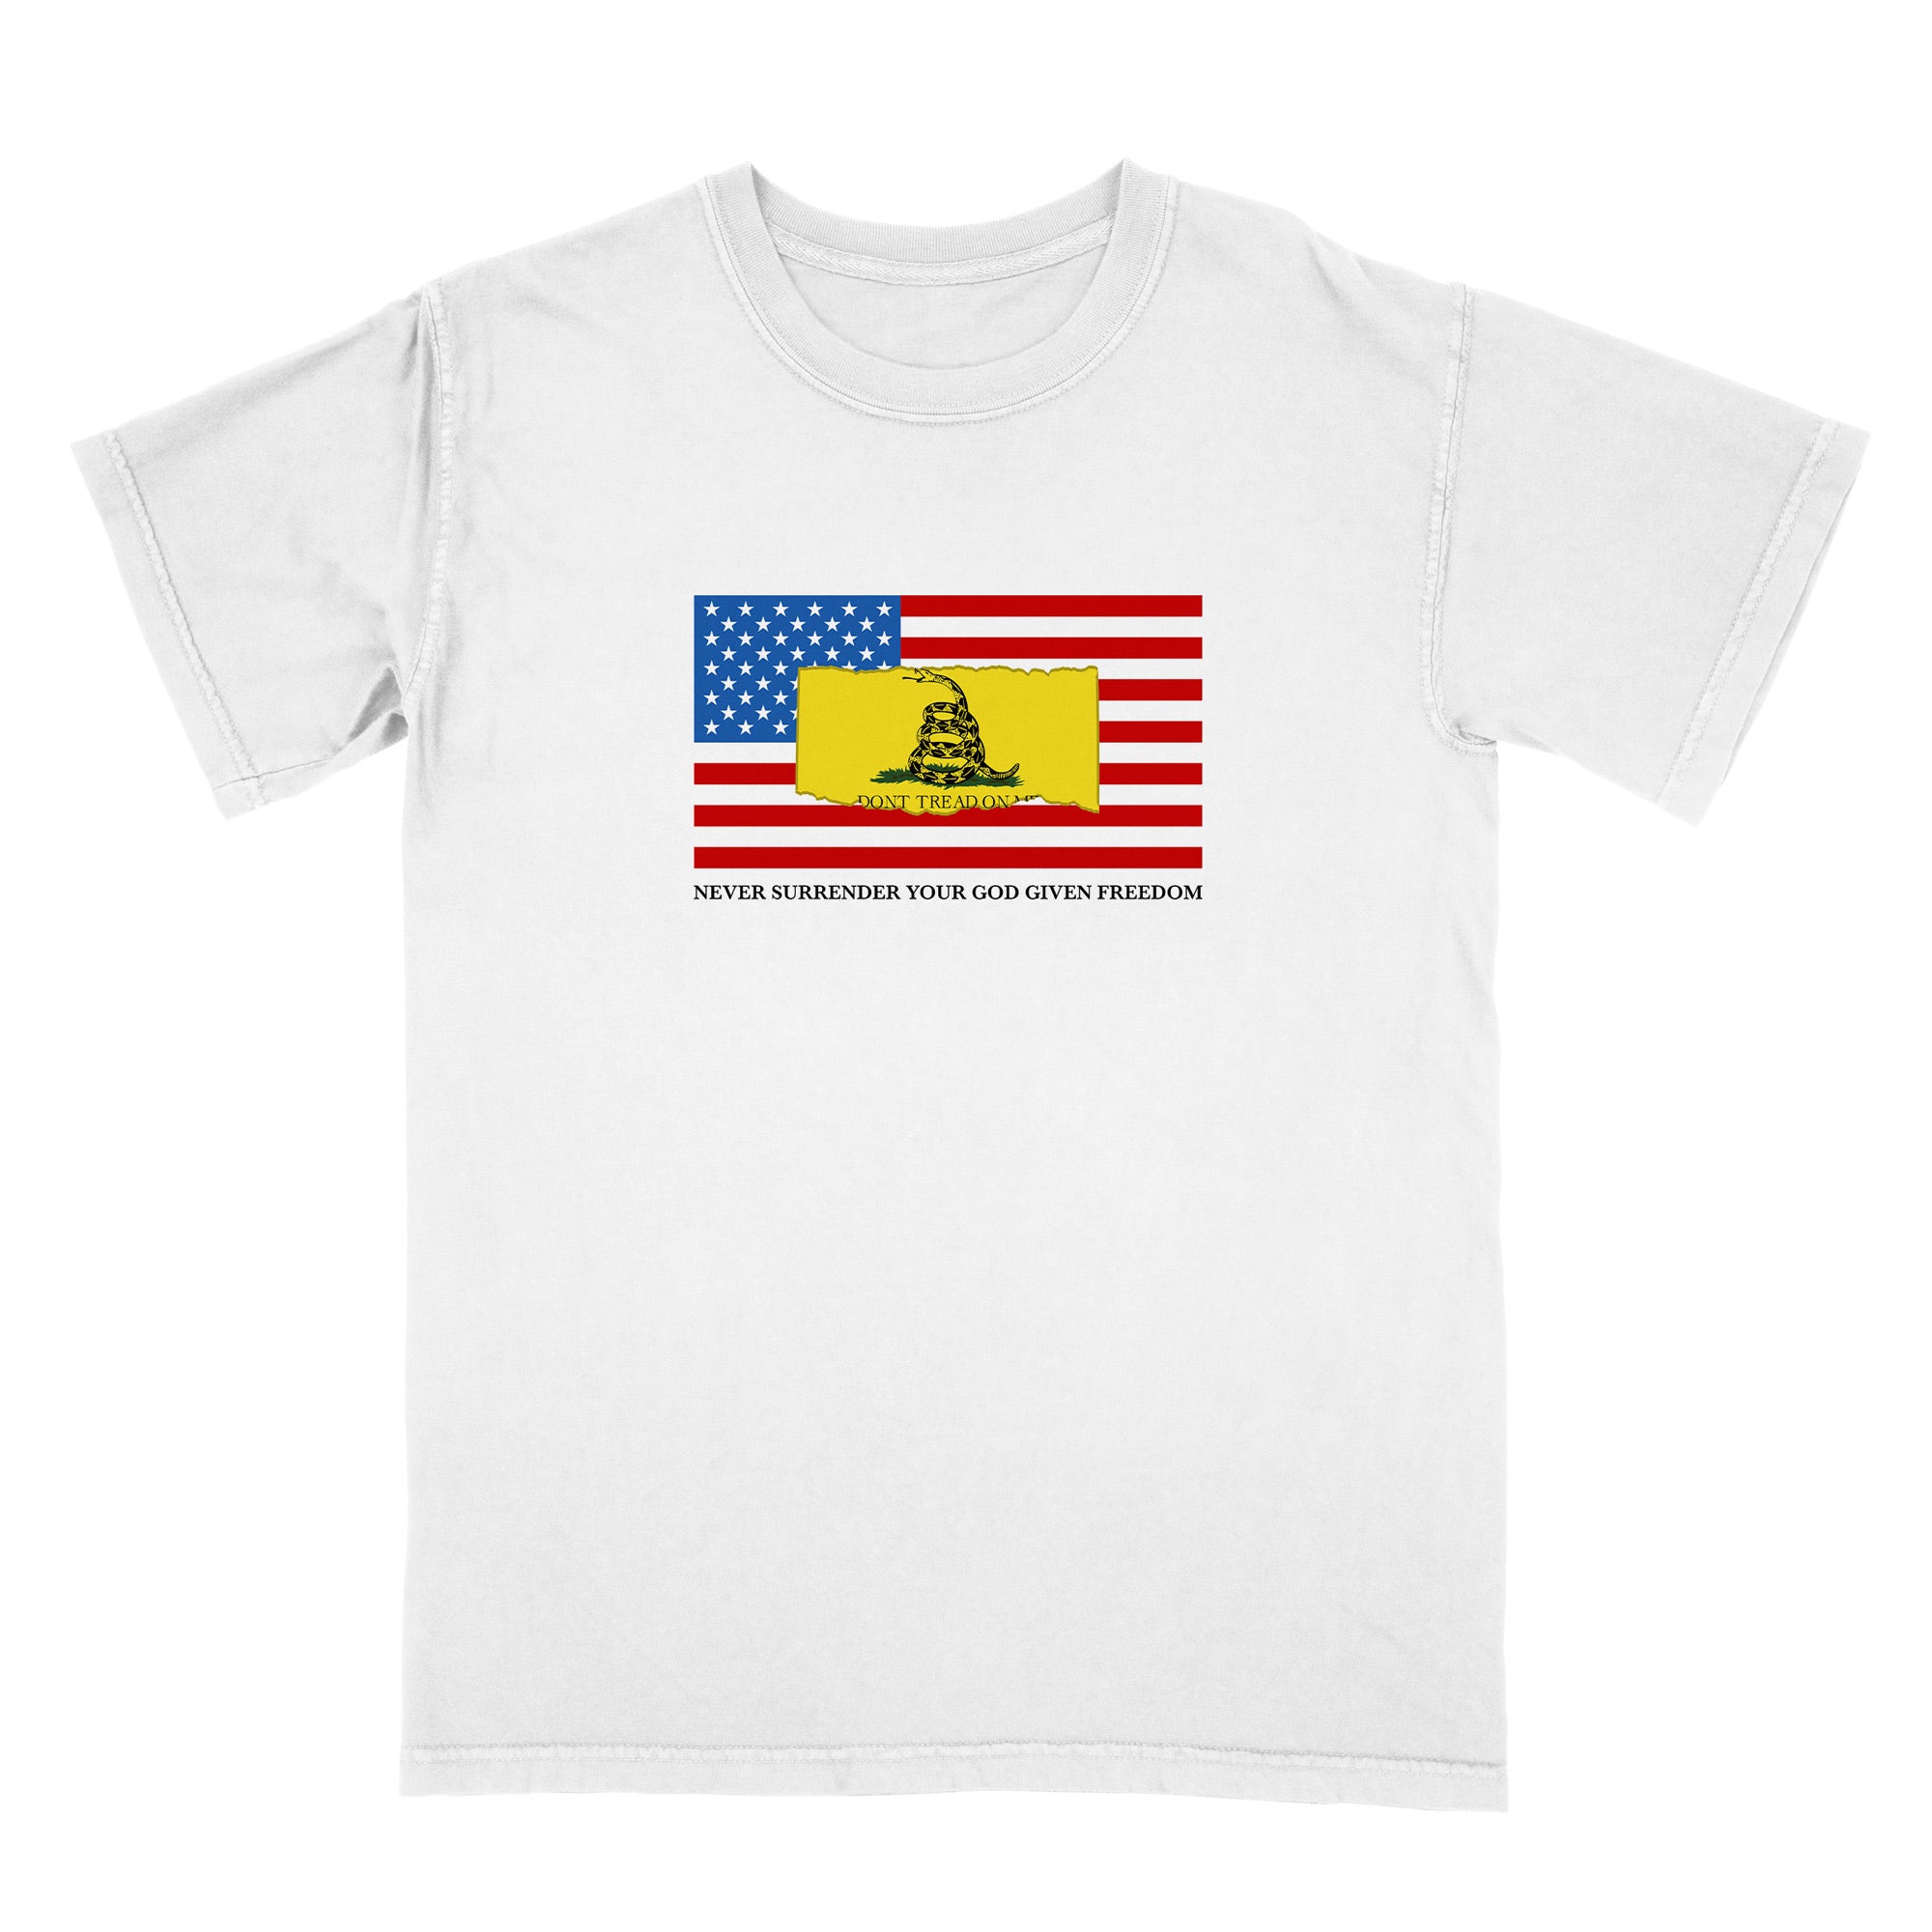 Two Flags Tee